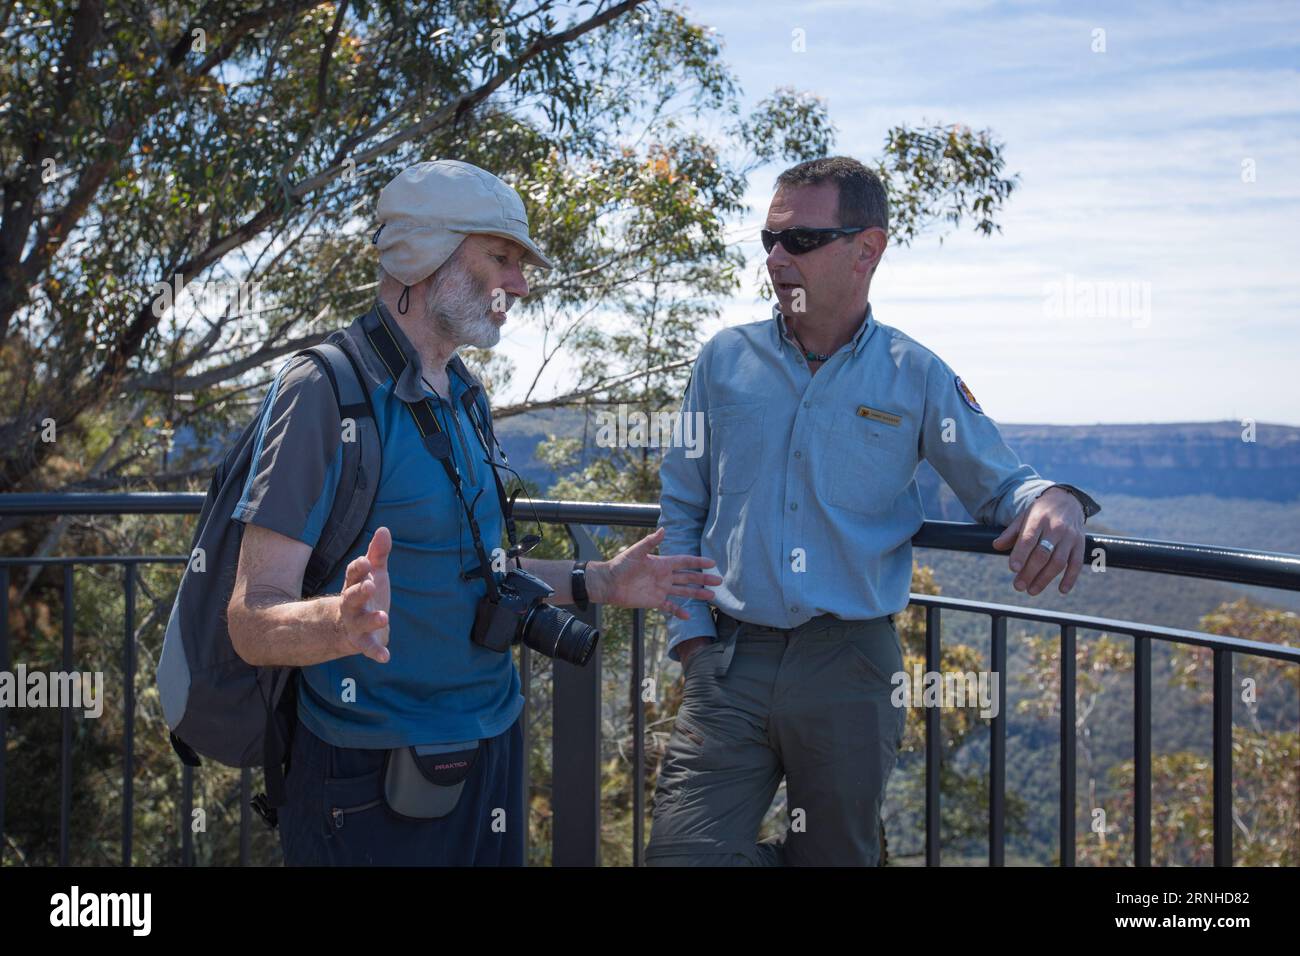 (161111) -- SYDNEY, Nov. 11, 2016 -- Park ranger Jamie Salijevic (R) introduces the park to a tourist in the Blue Mountains National Park in New South Wales state, Australia, Oct. 25, 2016. Four percent of Australia s continent is protected for conservation, encompassed within just over 500 national parks, or some 28 million hectares of land. Most national parks are managed by Australia s state and territory governments -- states are responsible for land management under Australia s constitution -- though the Commonwealth Government looks after six national parks, the National Botanic Gardens Stock Photo